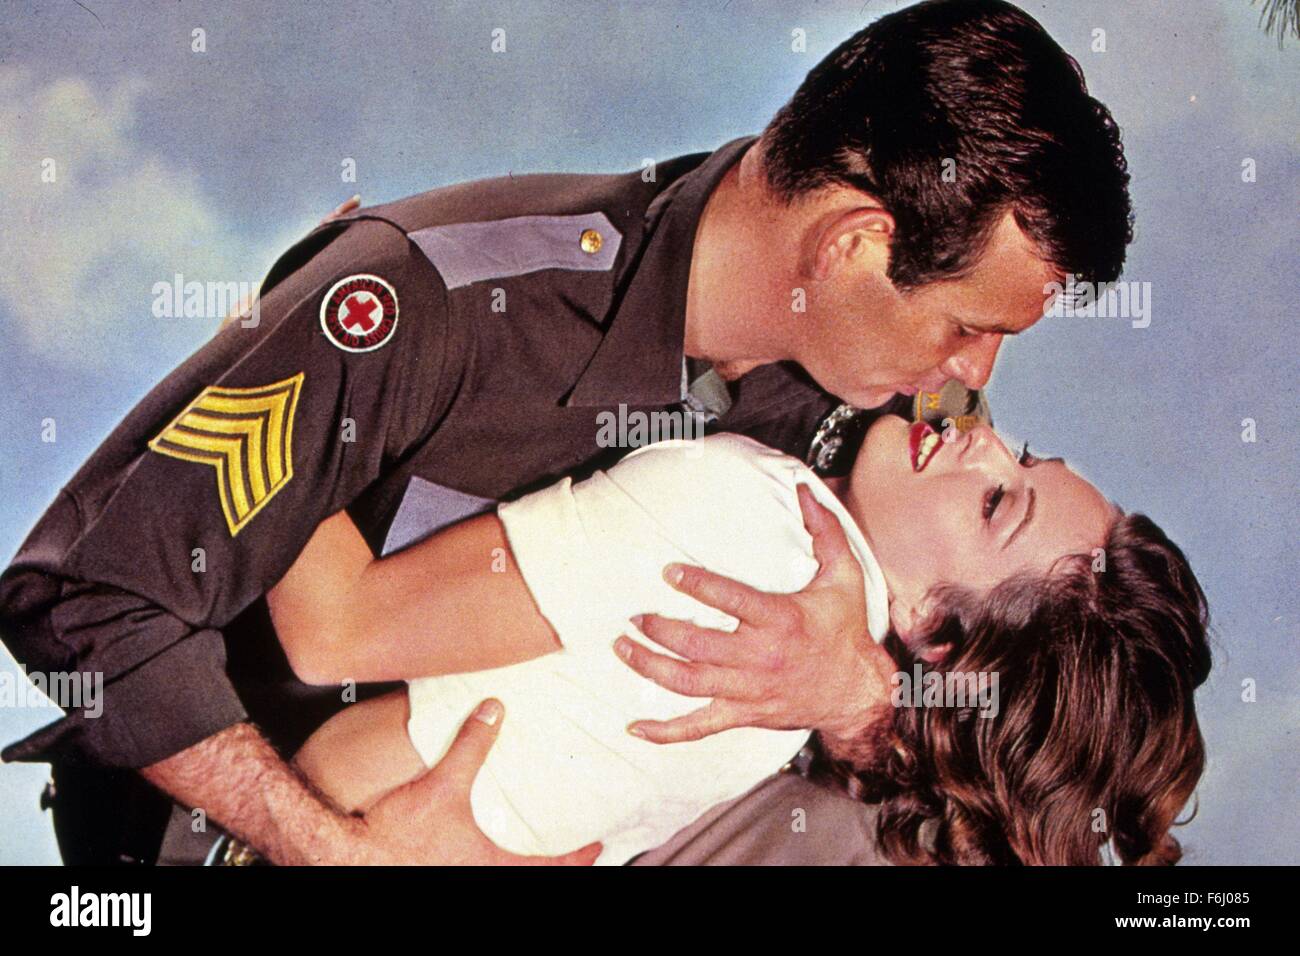 1961, Film Title: RING OF FIRE, Director: ANDREW L STONE, Studio: MGM, Pictured: DAVID JANSSEN, ROMANCE, ANDREW L STONE. (Credit Image: SNAP) Stock Photo